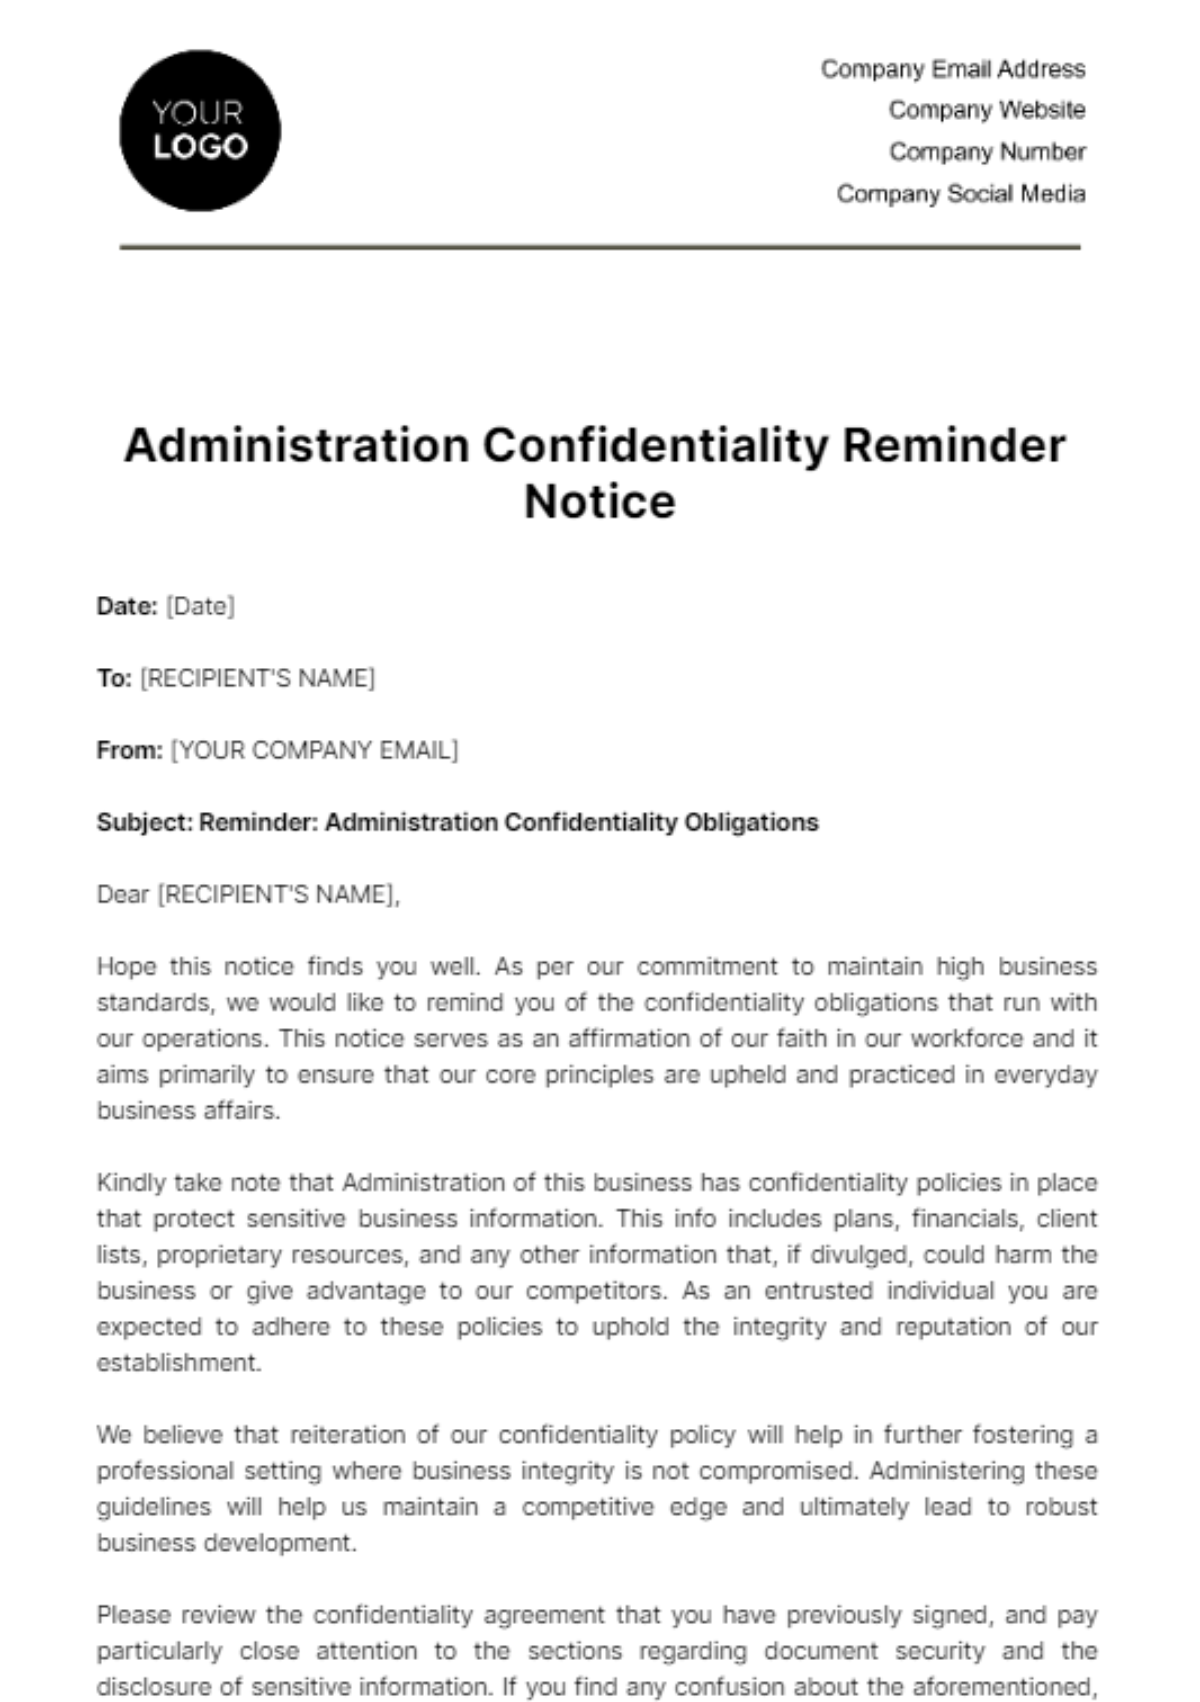 Administration Confidentiality Reminder Notice Template